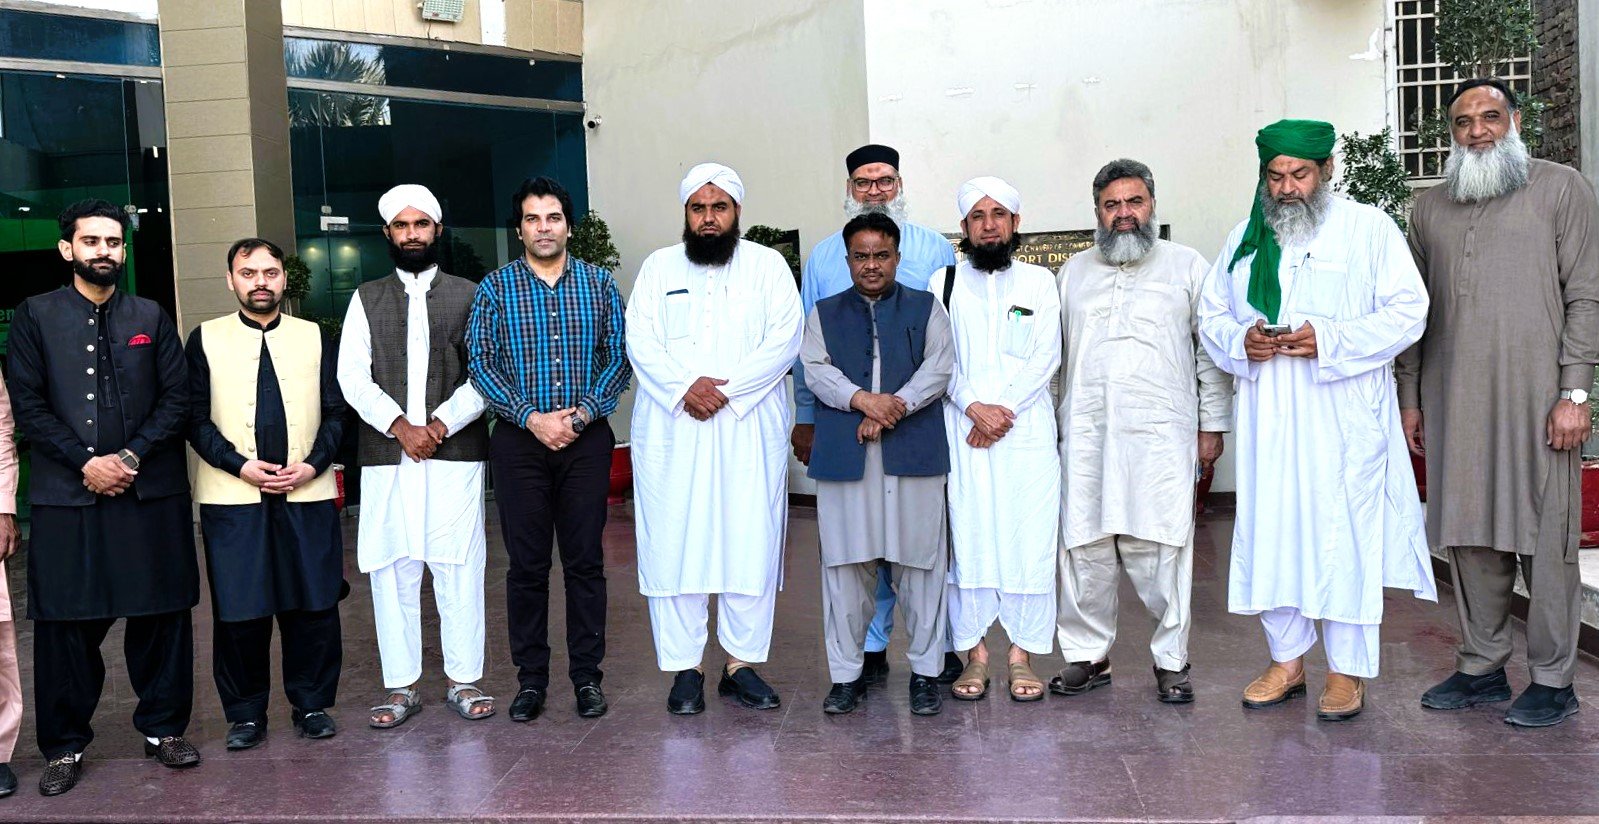 Gujrat Chamber of Commerce & Industry organized an enlightening Islamic lecture on "Rules of Business", beautifully articulated by Mr. Molana Faheem Attari Madni shedding light on the Islamic principles that govern business dealings.